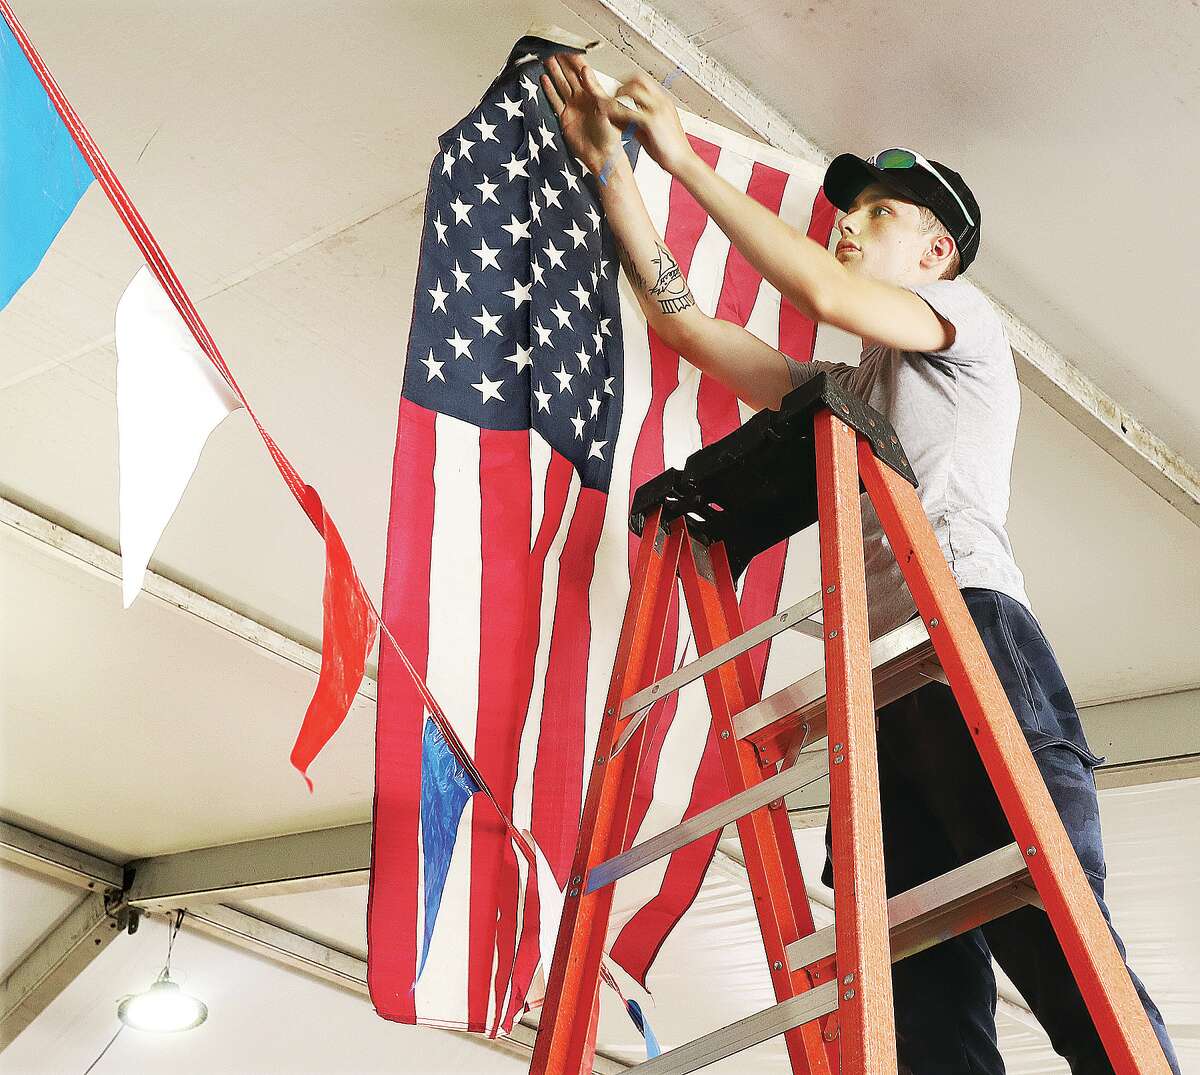 Tristan Acup of Alton hangs flags under the large fireworks tent in West Alton, Missouri, behind the Pit Stop gas station at the intersection of U.S. 67 and Missouri Highway 94. The popular fireworks tent opened last week. Several communities will again this year be firing off public fireworks displays in the area.